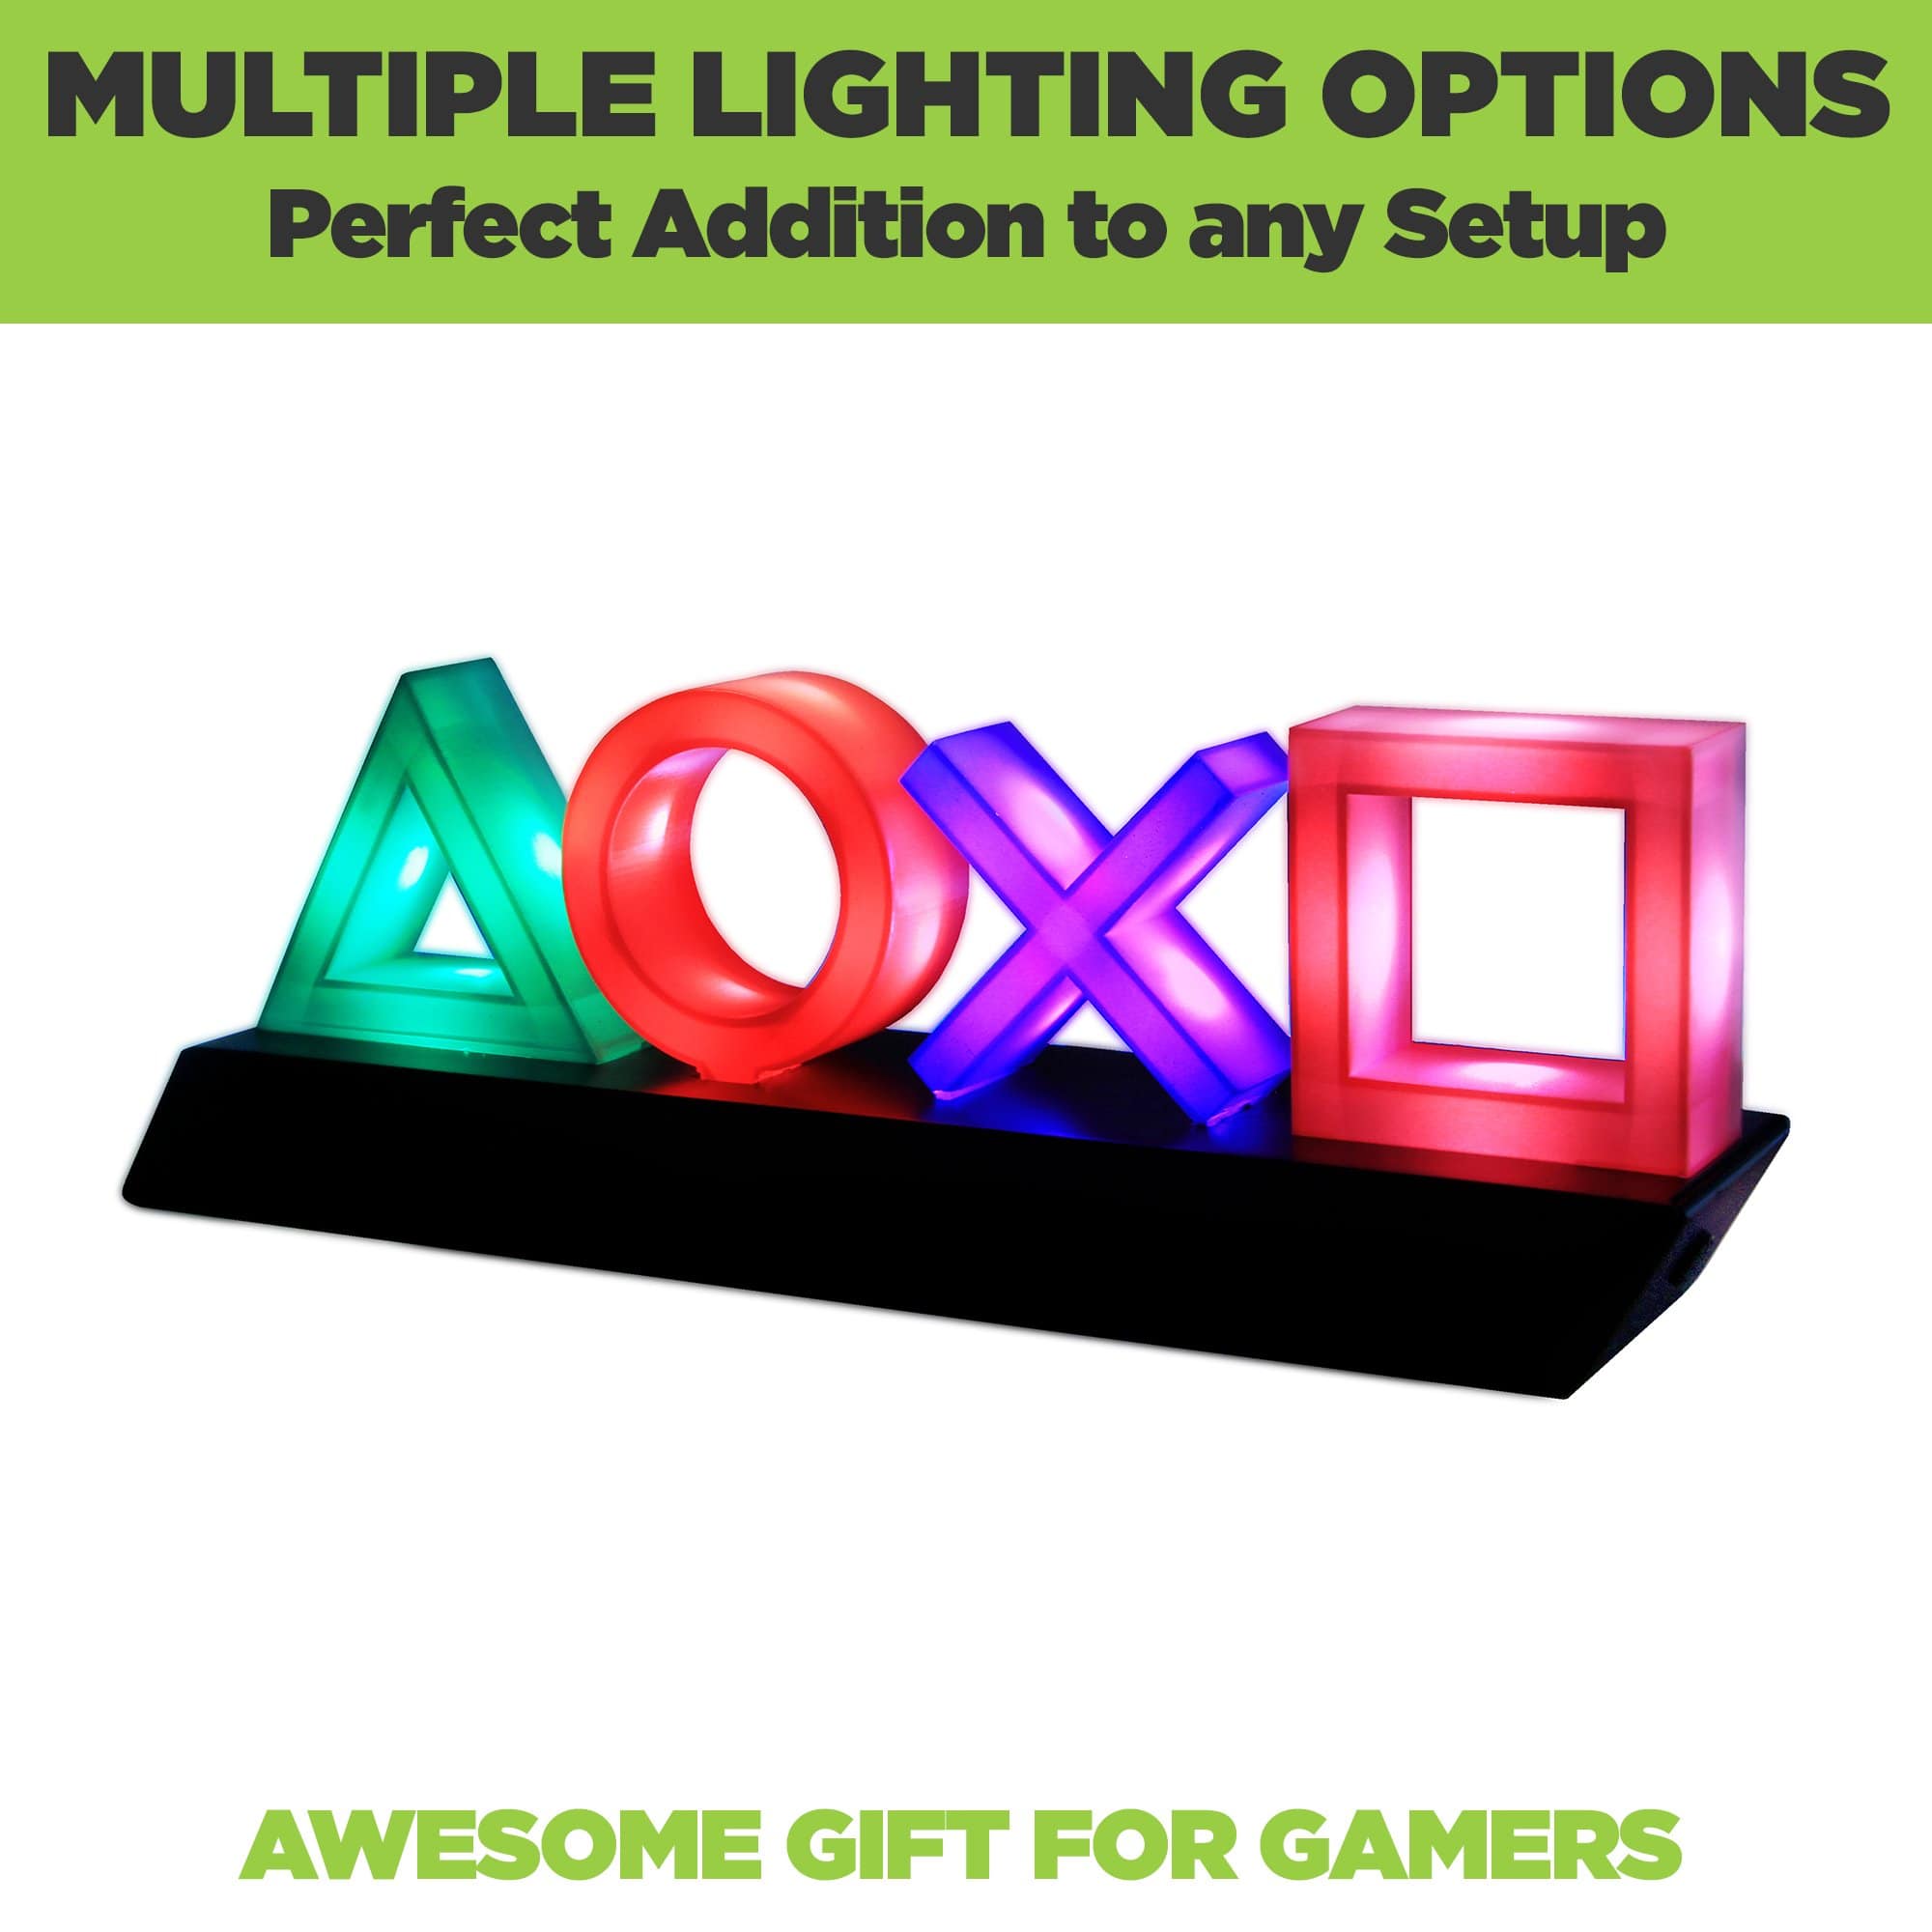 Playstation icon light with multiple lighting options. Awesome gift for gamers.